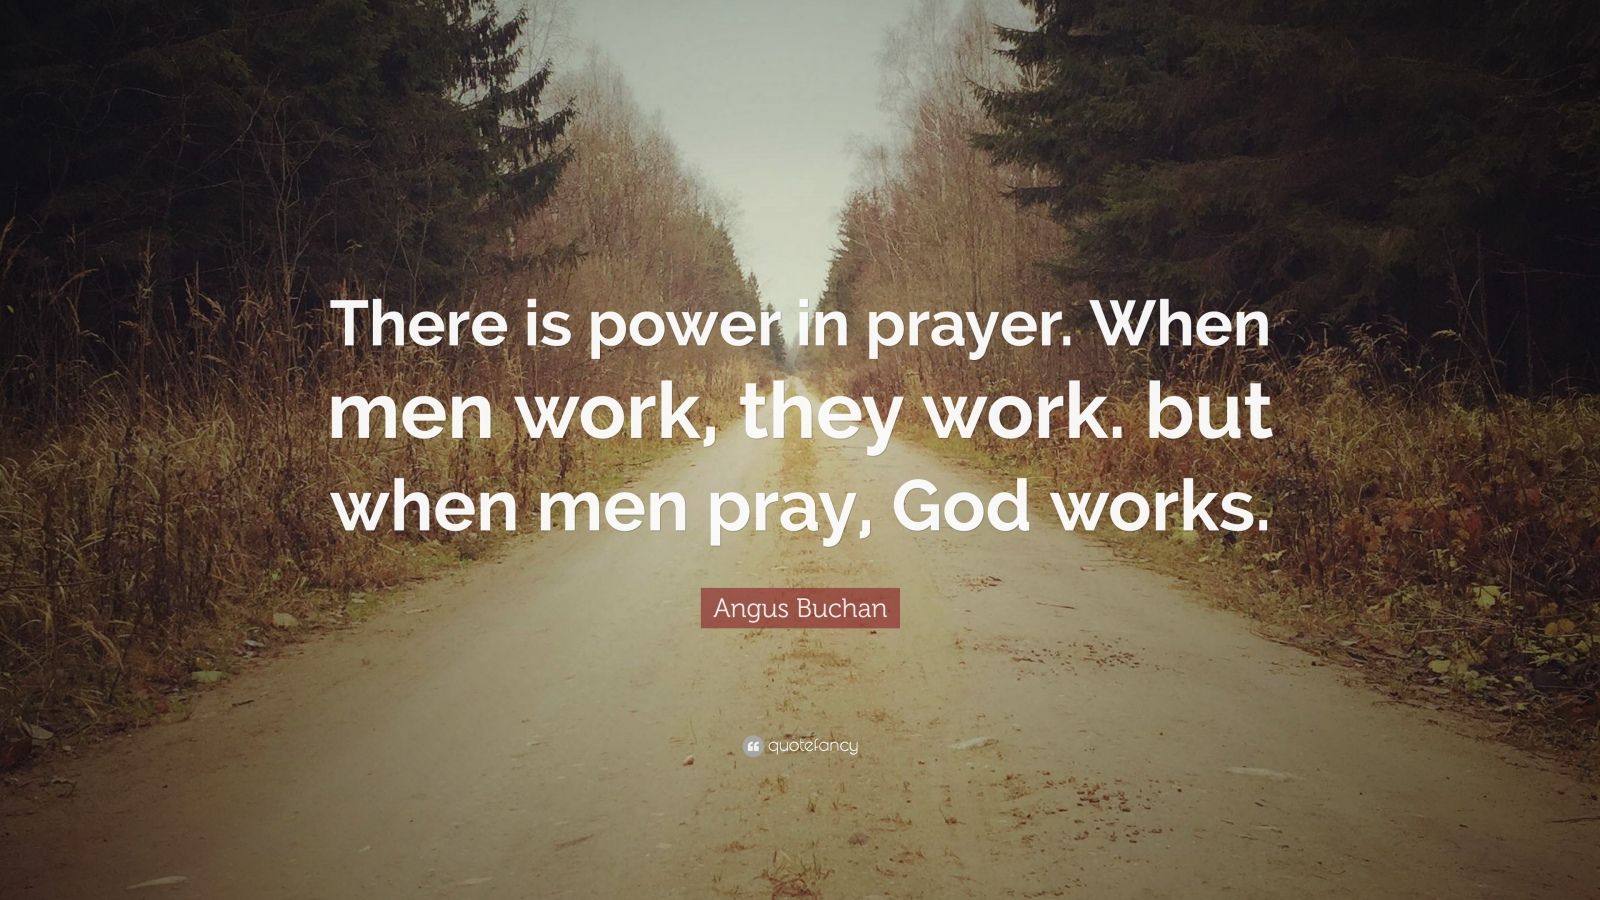 Angus Buchan Quote: “There is power in prayer. When men work, they work ...
